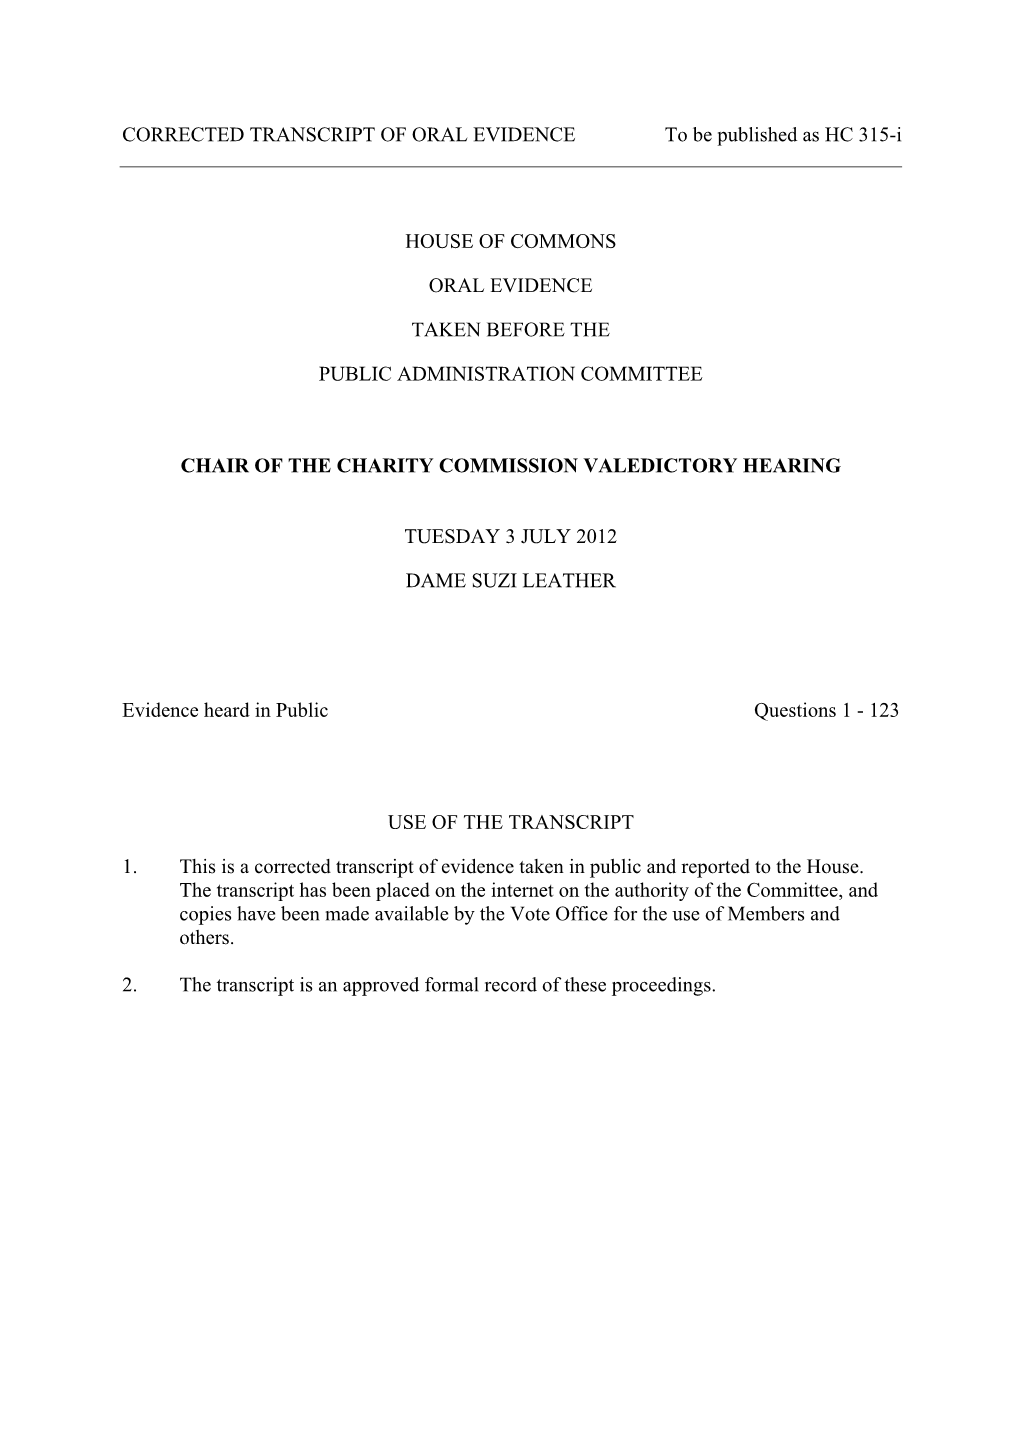 CORRECTED TRANSCRIPT of ORAL EVIDENCE to Be Published As HC 315-I